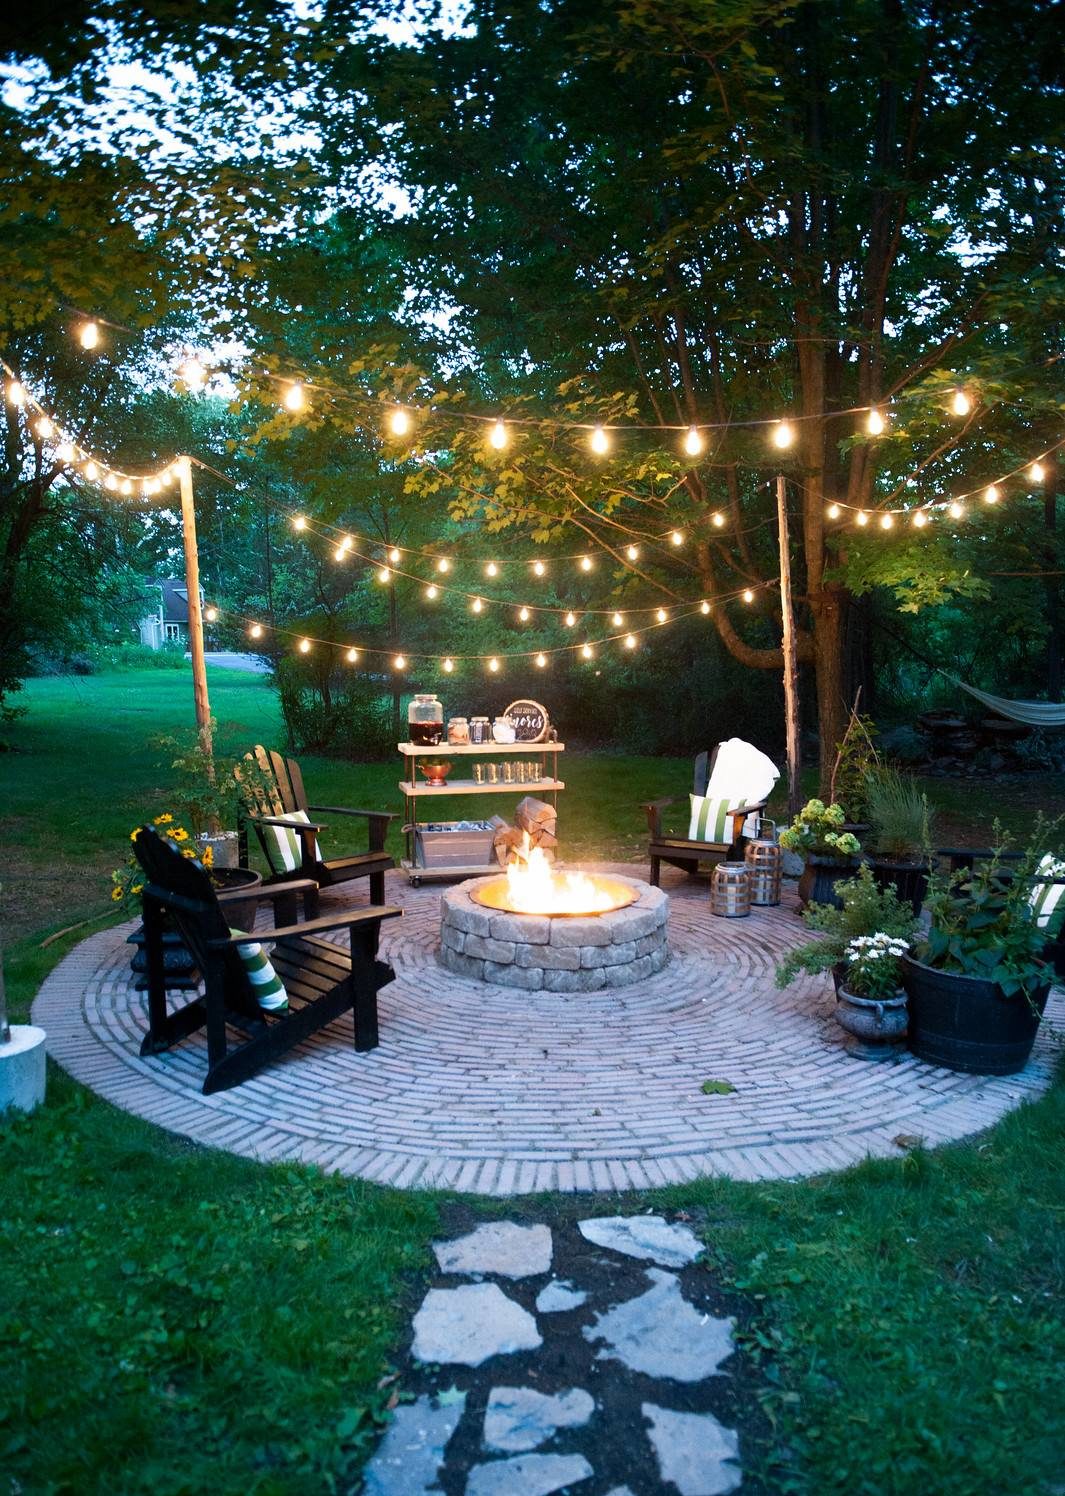 Unique Fire Pit Area Ideas For, Pictures Of Backyard Fire Pits